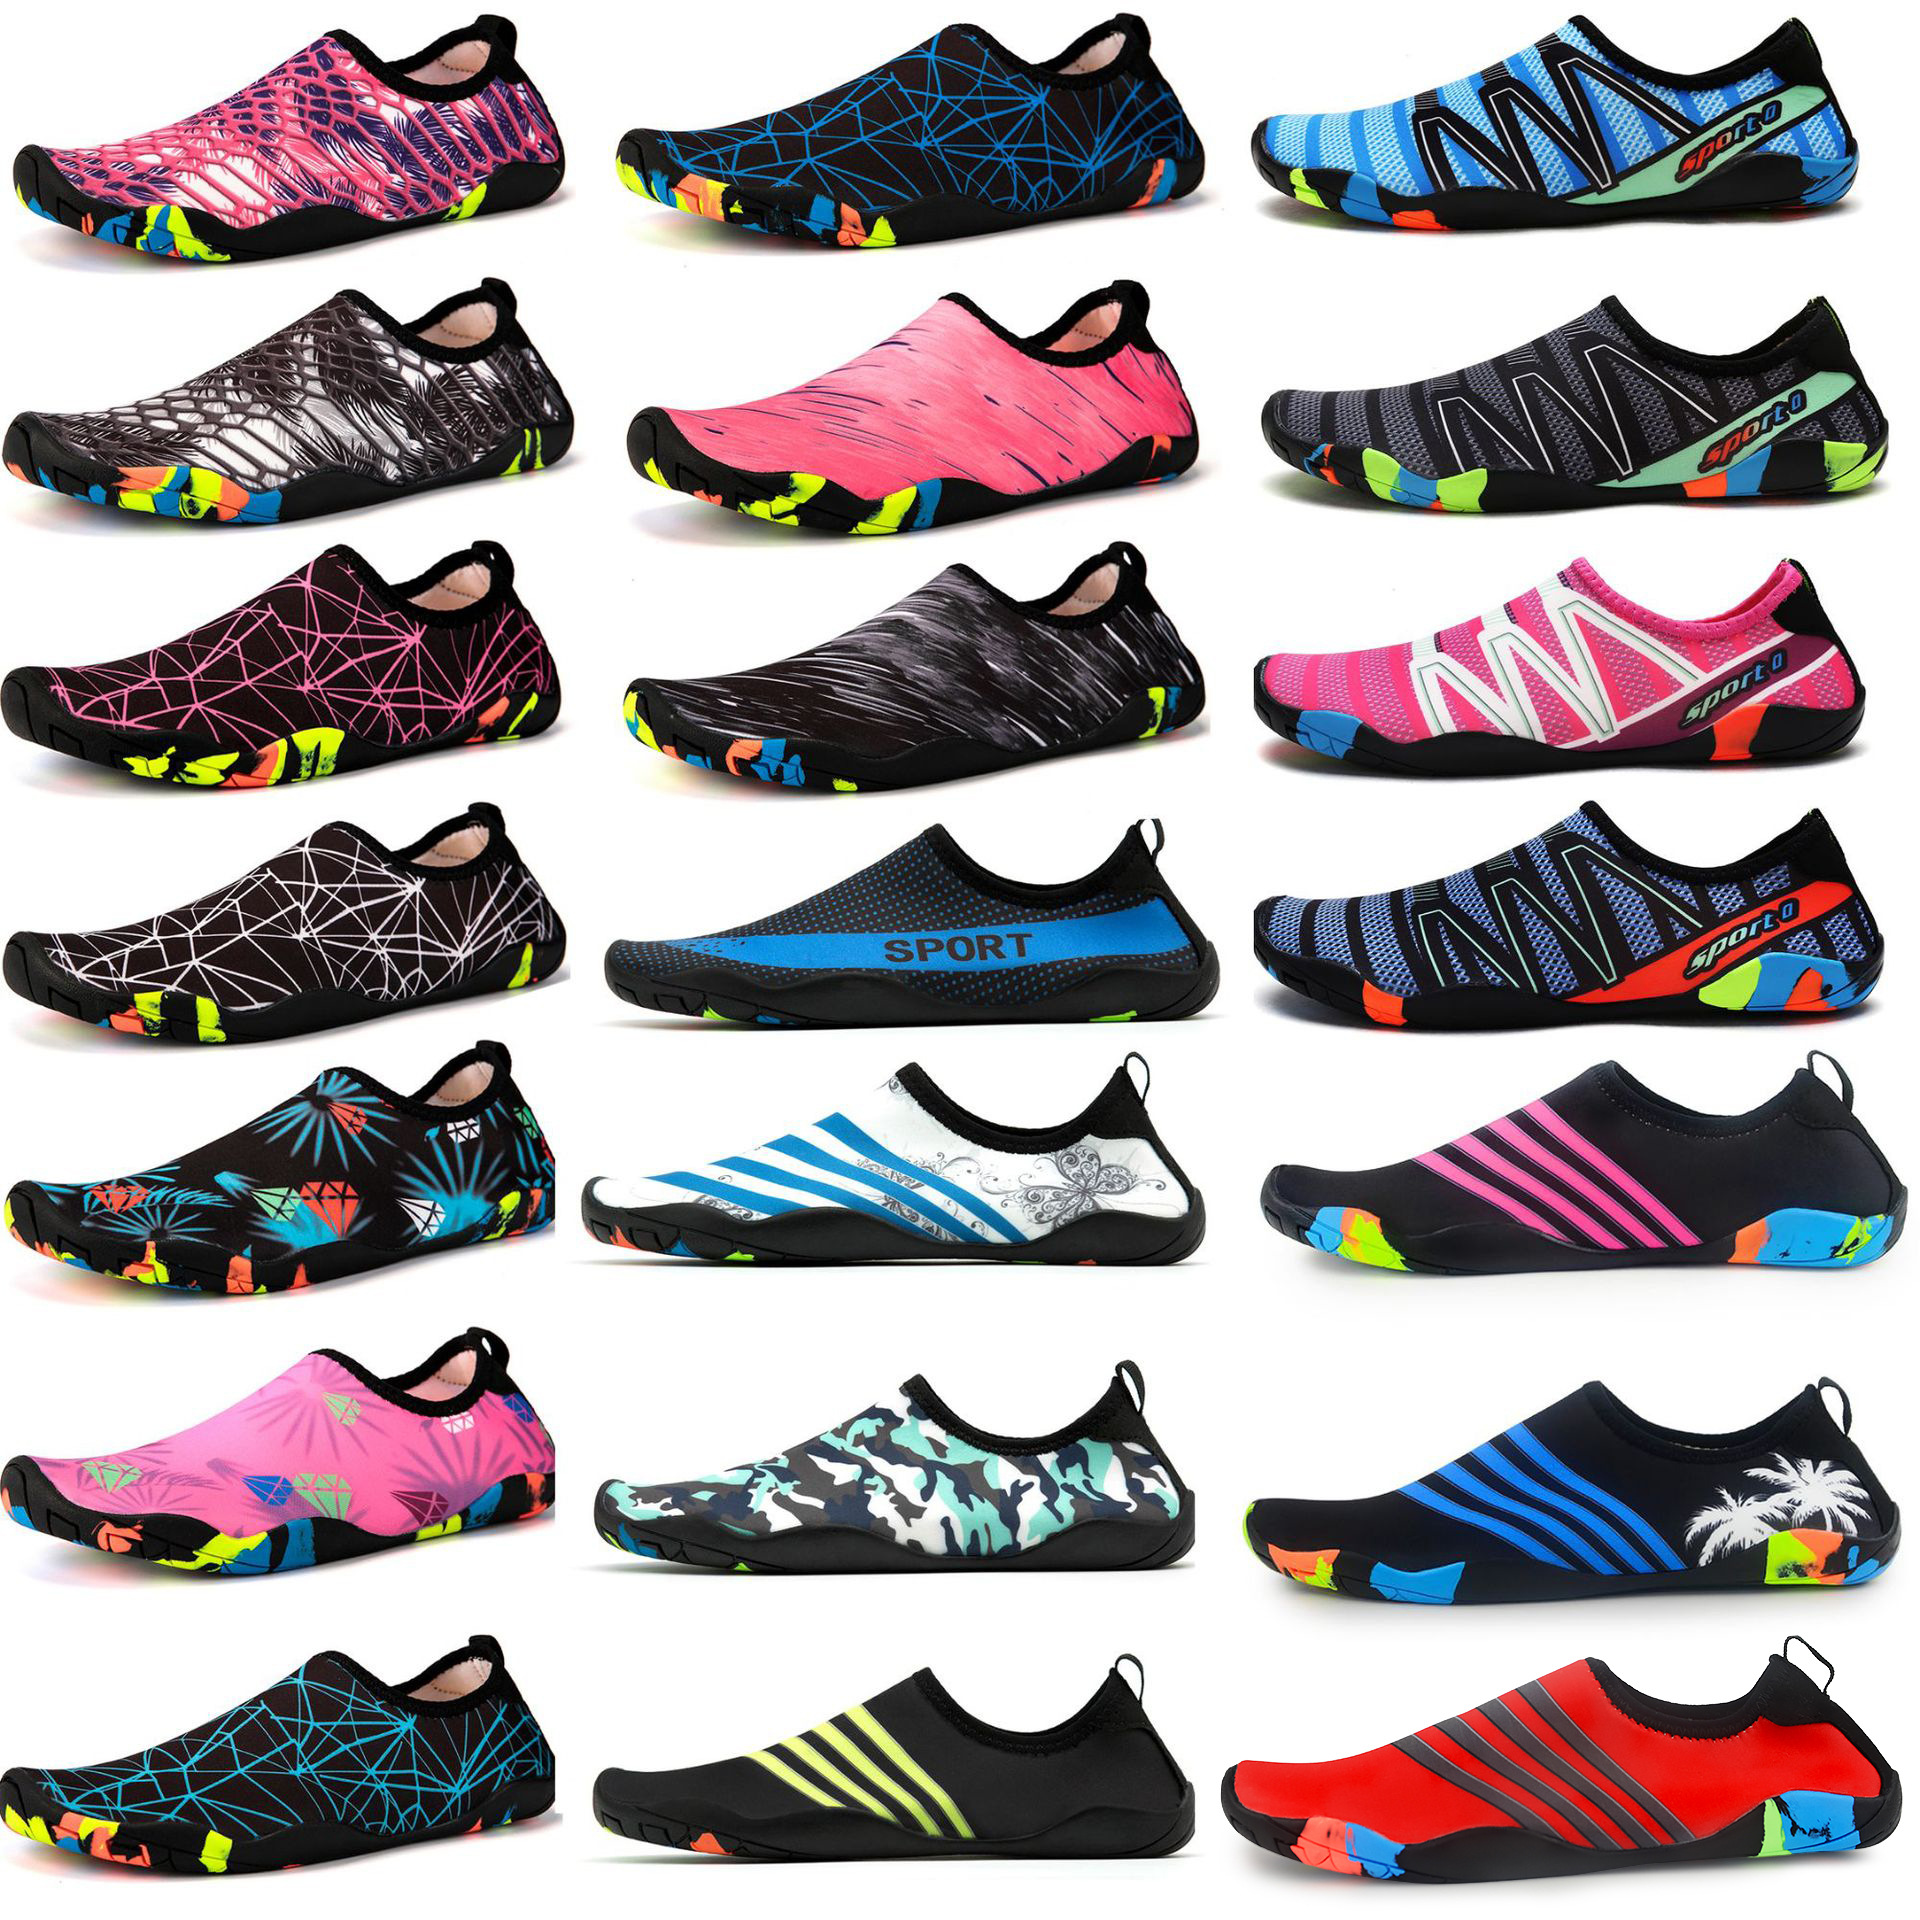 Factory Water Proof Sports Water Sport Shoe Barefoot Print Quick Dry Breathable Beach Shoe